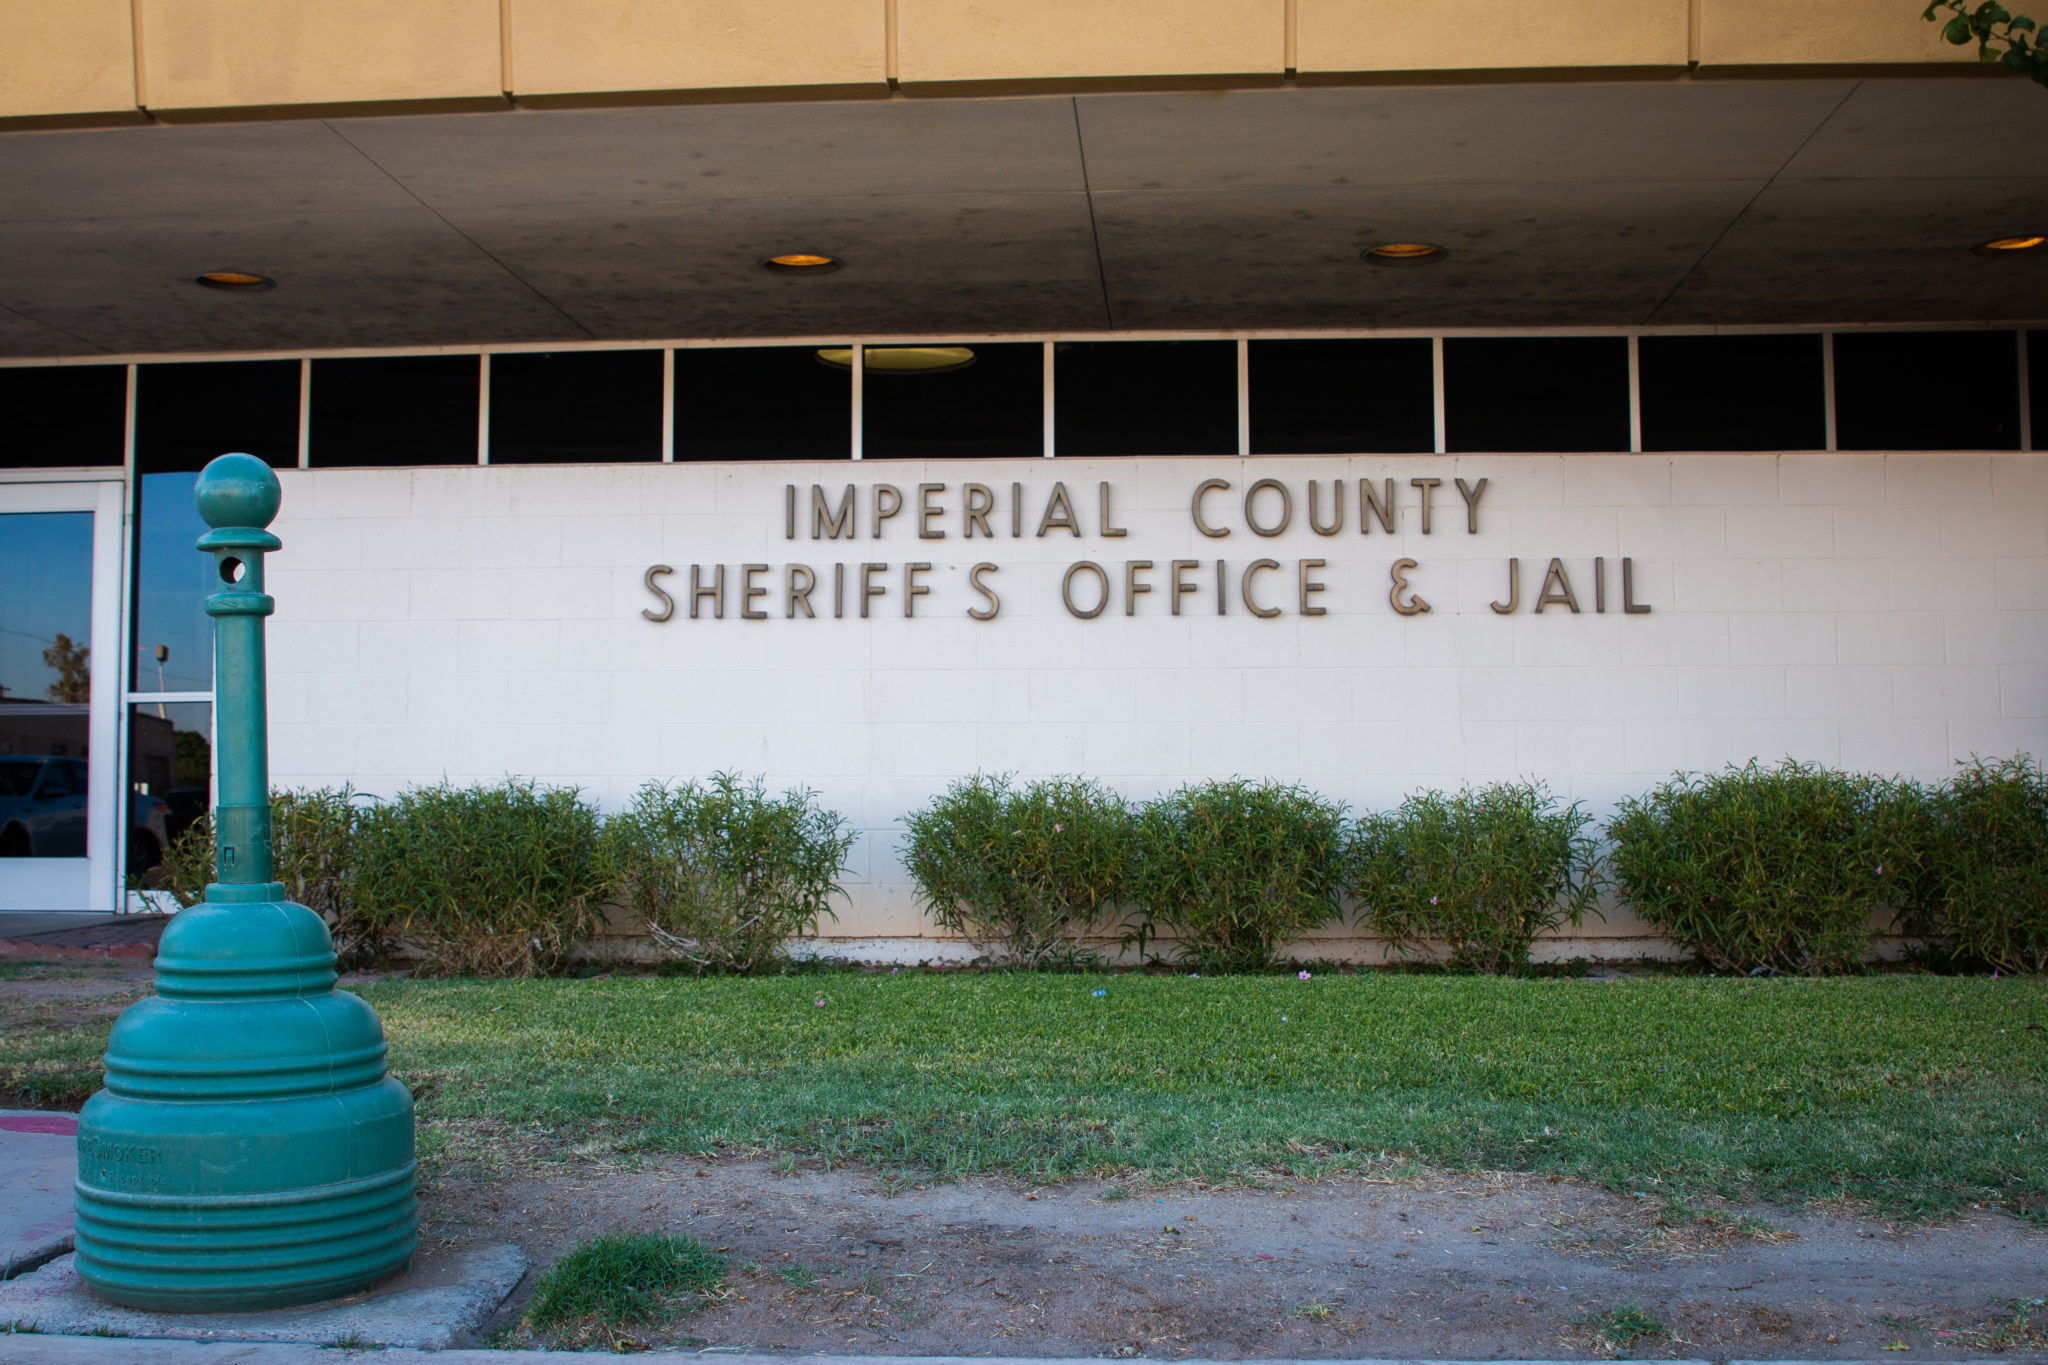 Image of Imperial County Sheriff's Office